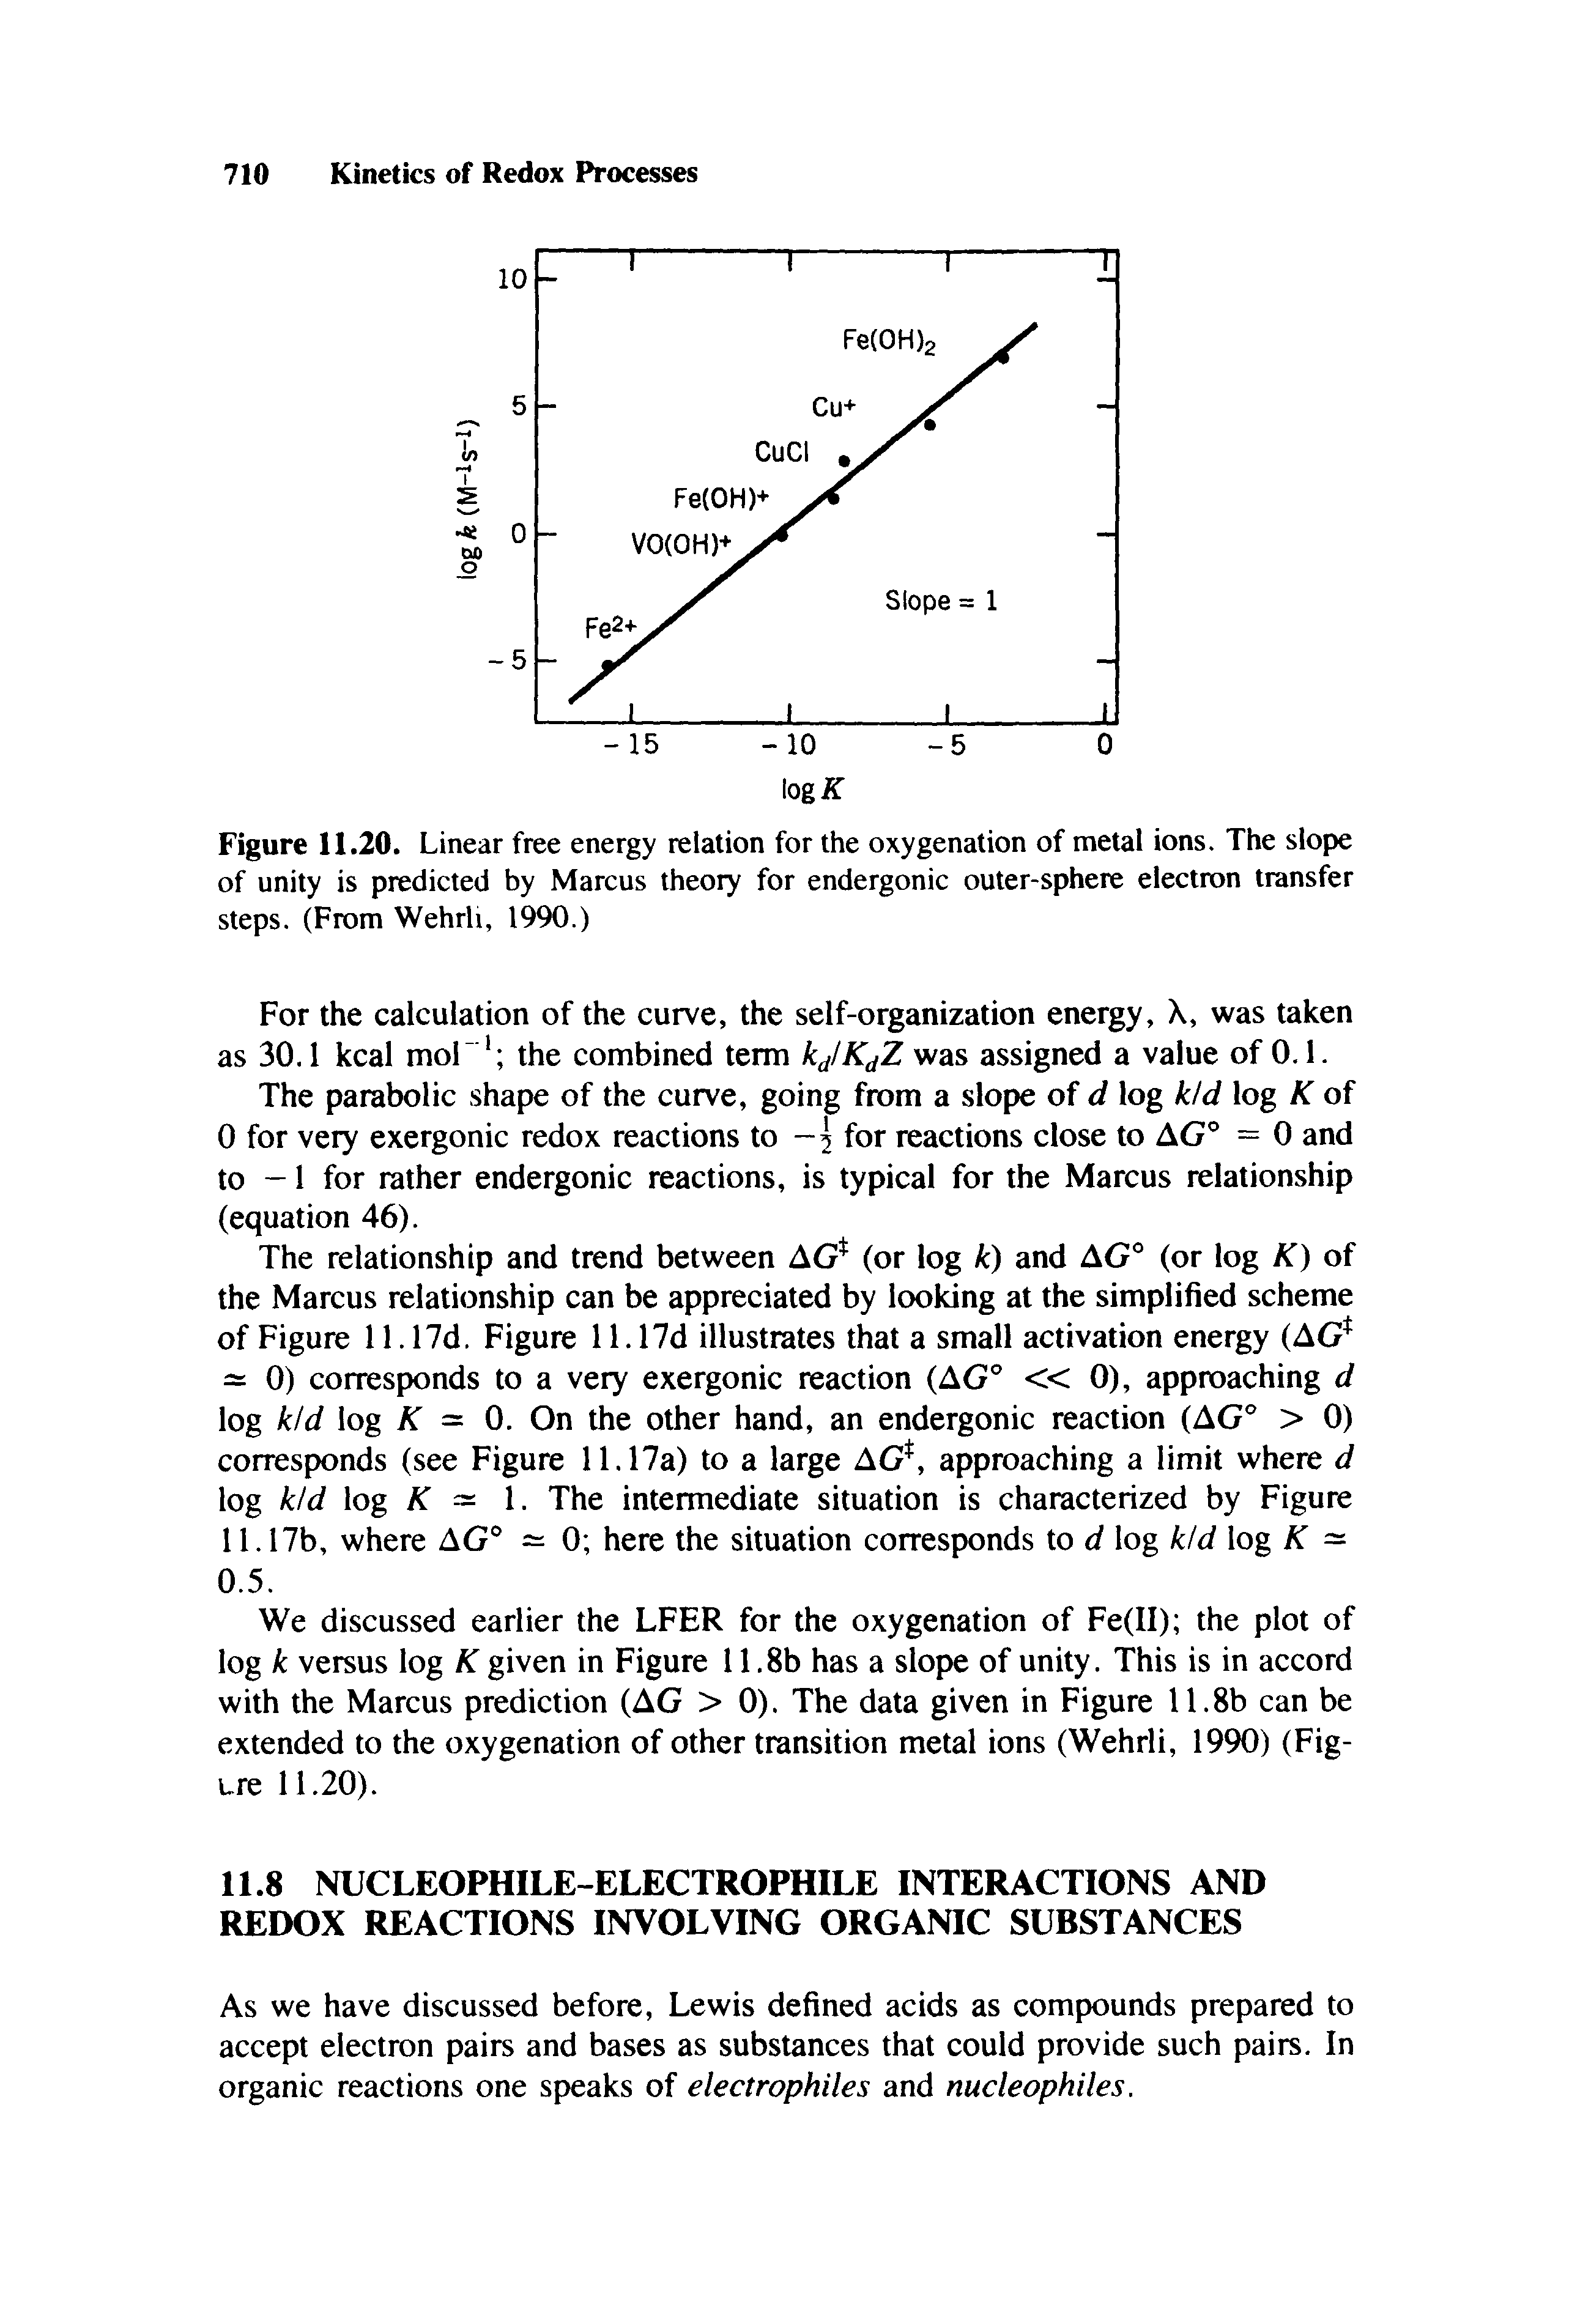 Figure 11.20. Linear free energy relation for the oxygenation of metal ions. The slope of unity is predicted by Marcus theory for endergonic outer-sphere electron transfer steps. (From Wehrli, 1990.)...